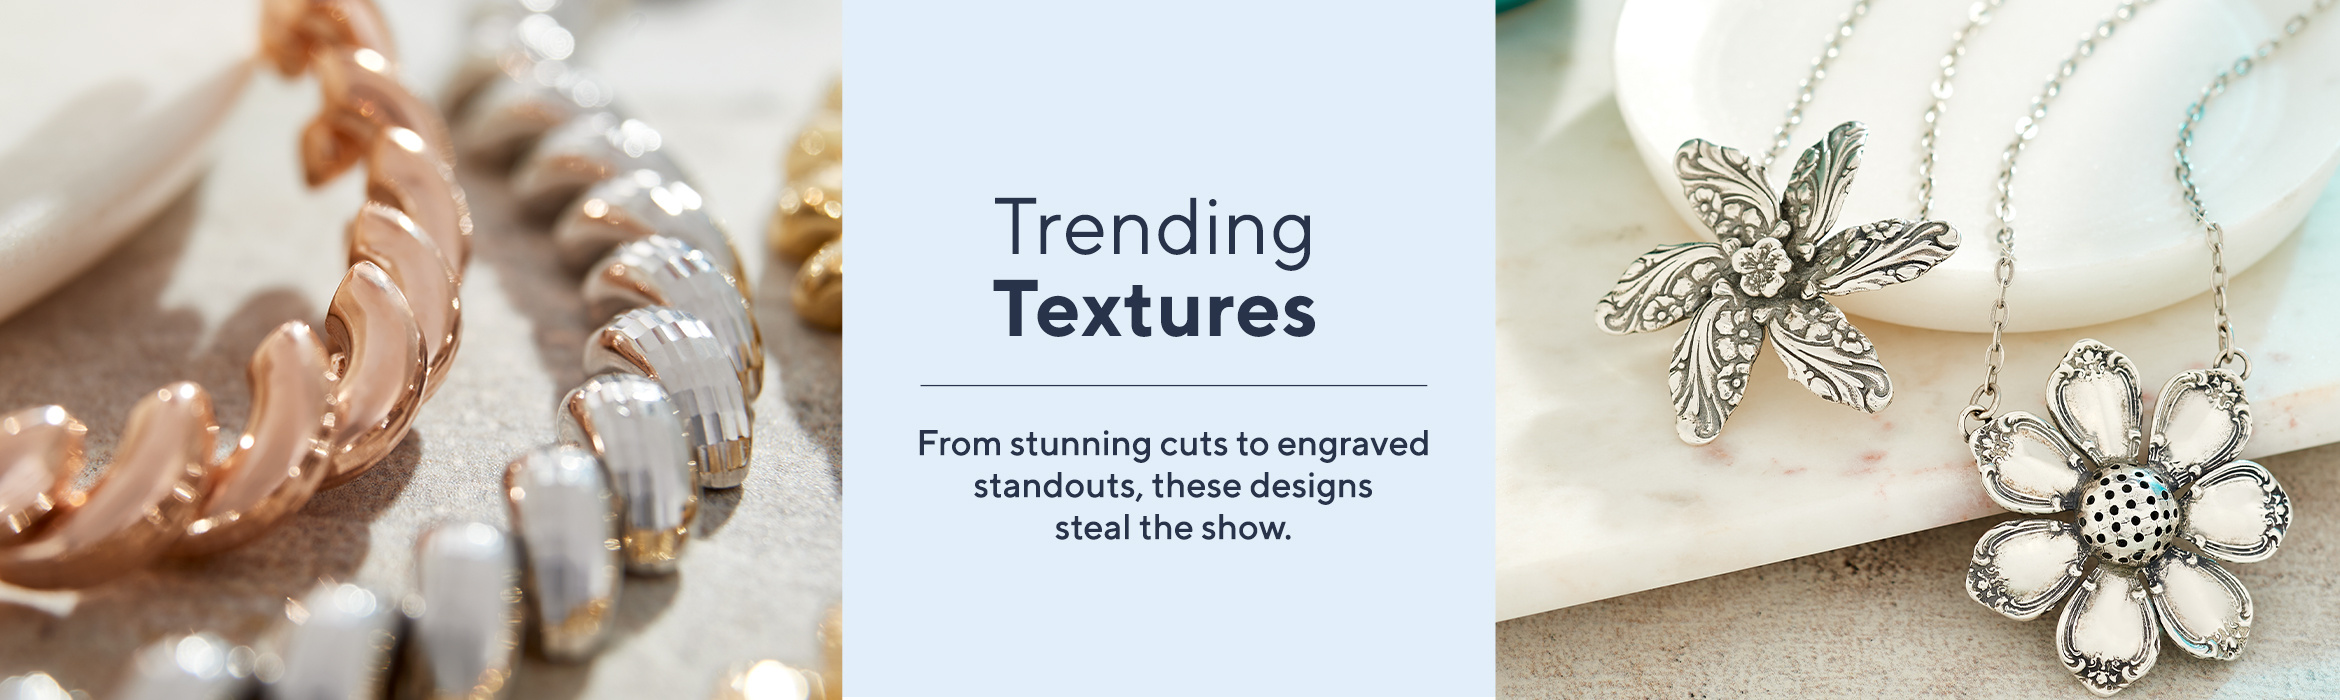 Trending Textures  From stunning cuts to engraved standouts, these designs steal the show.